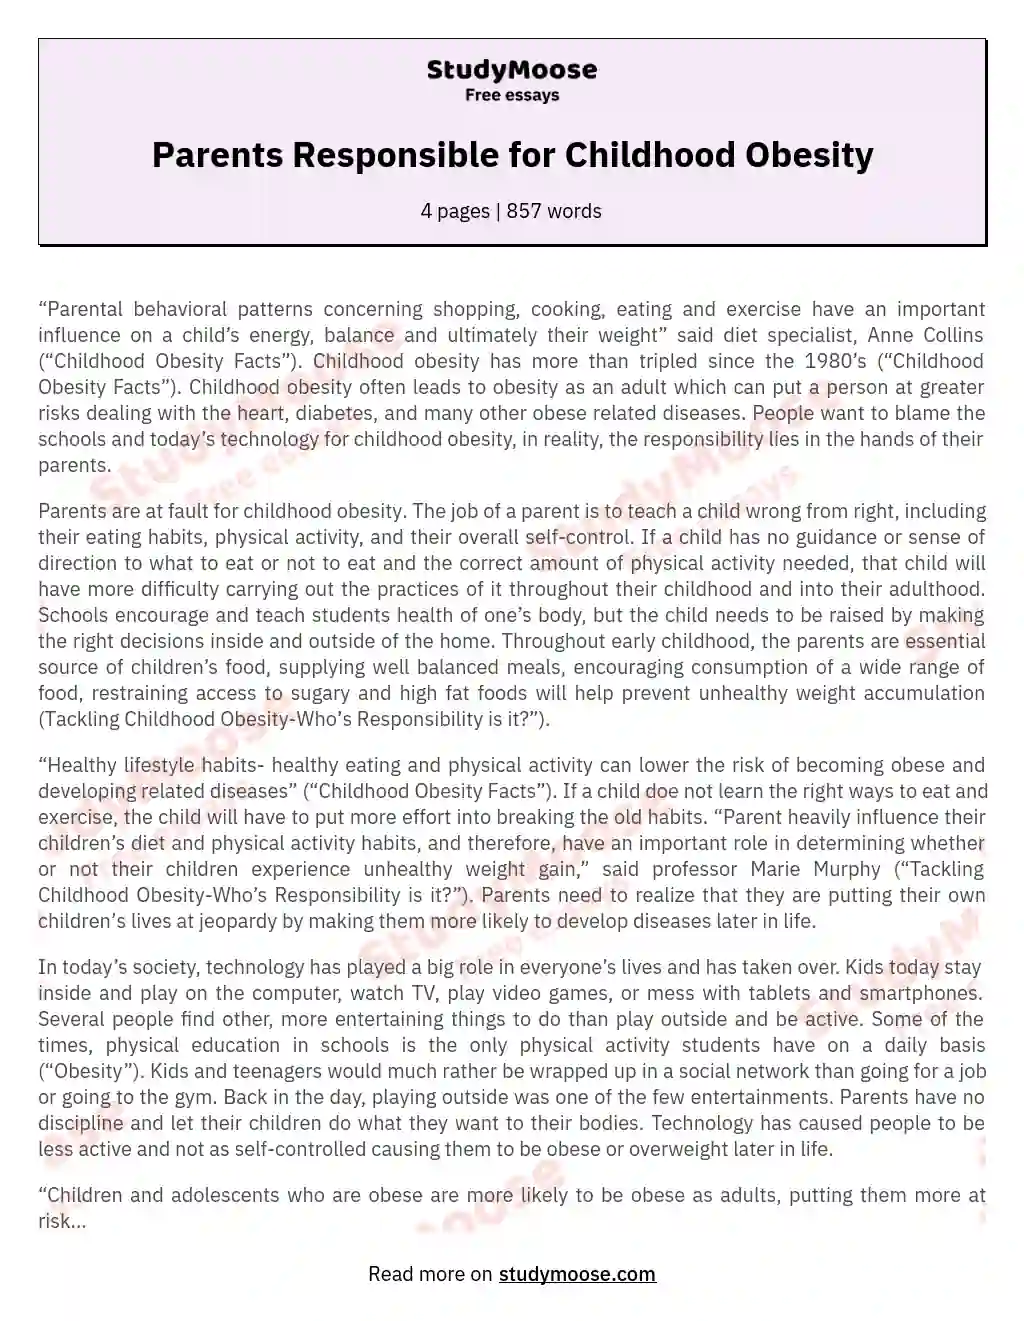 Parents Responsible for Childhood Obesity essay